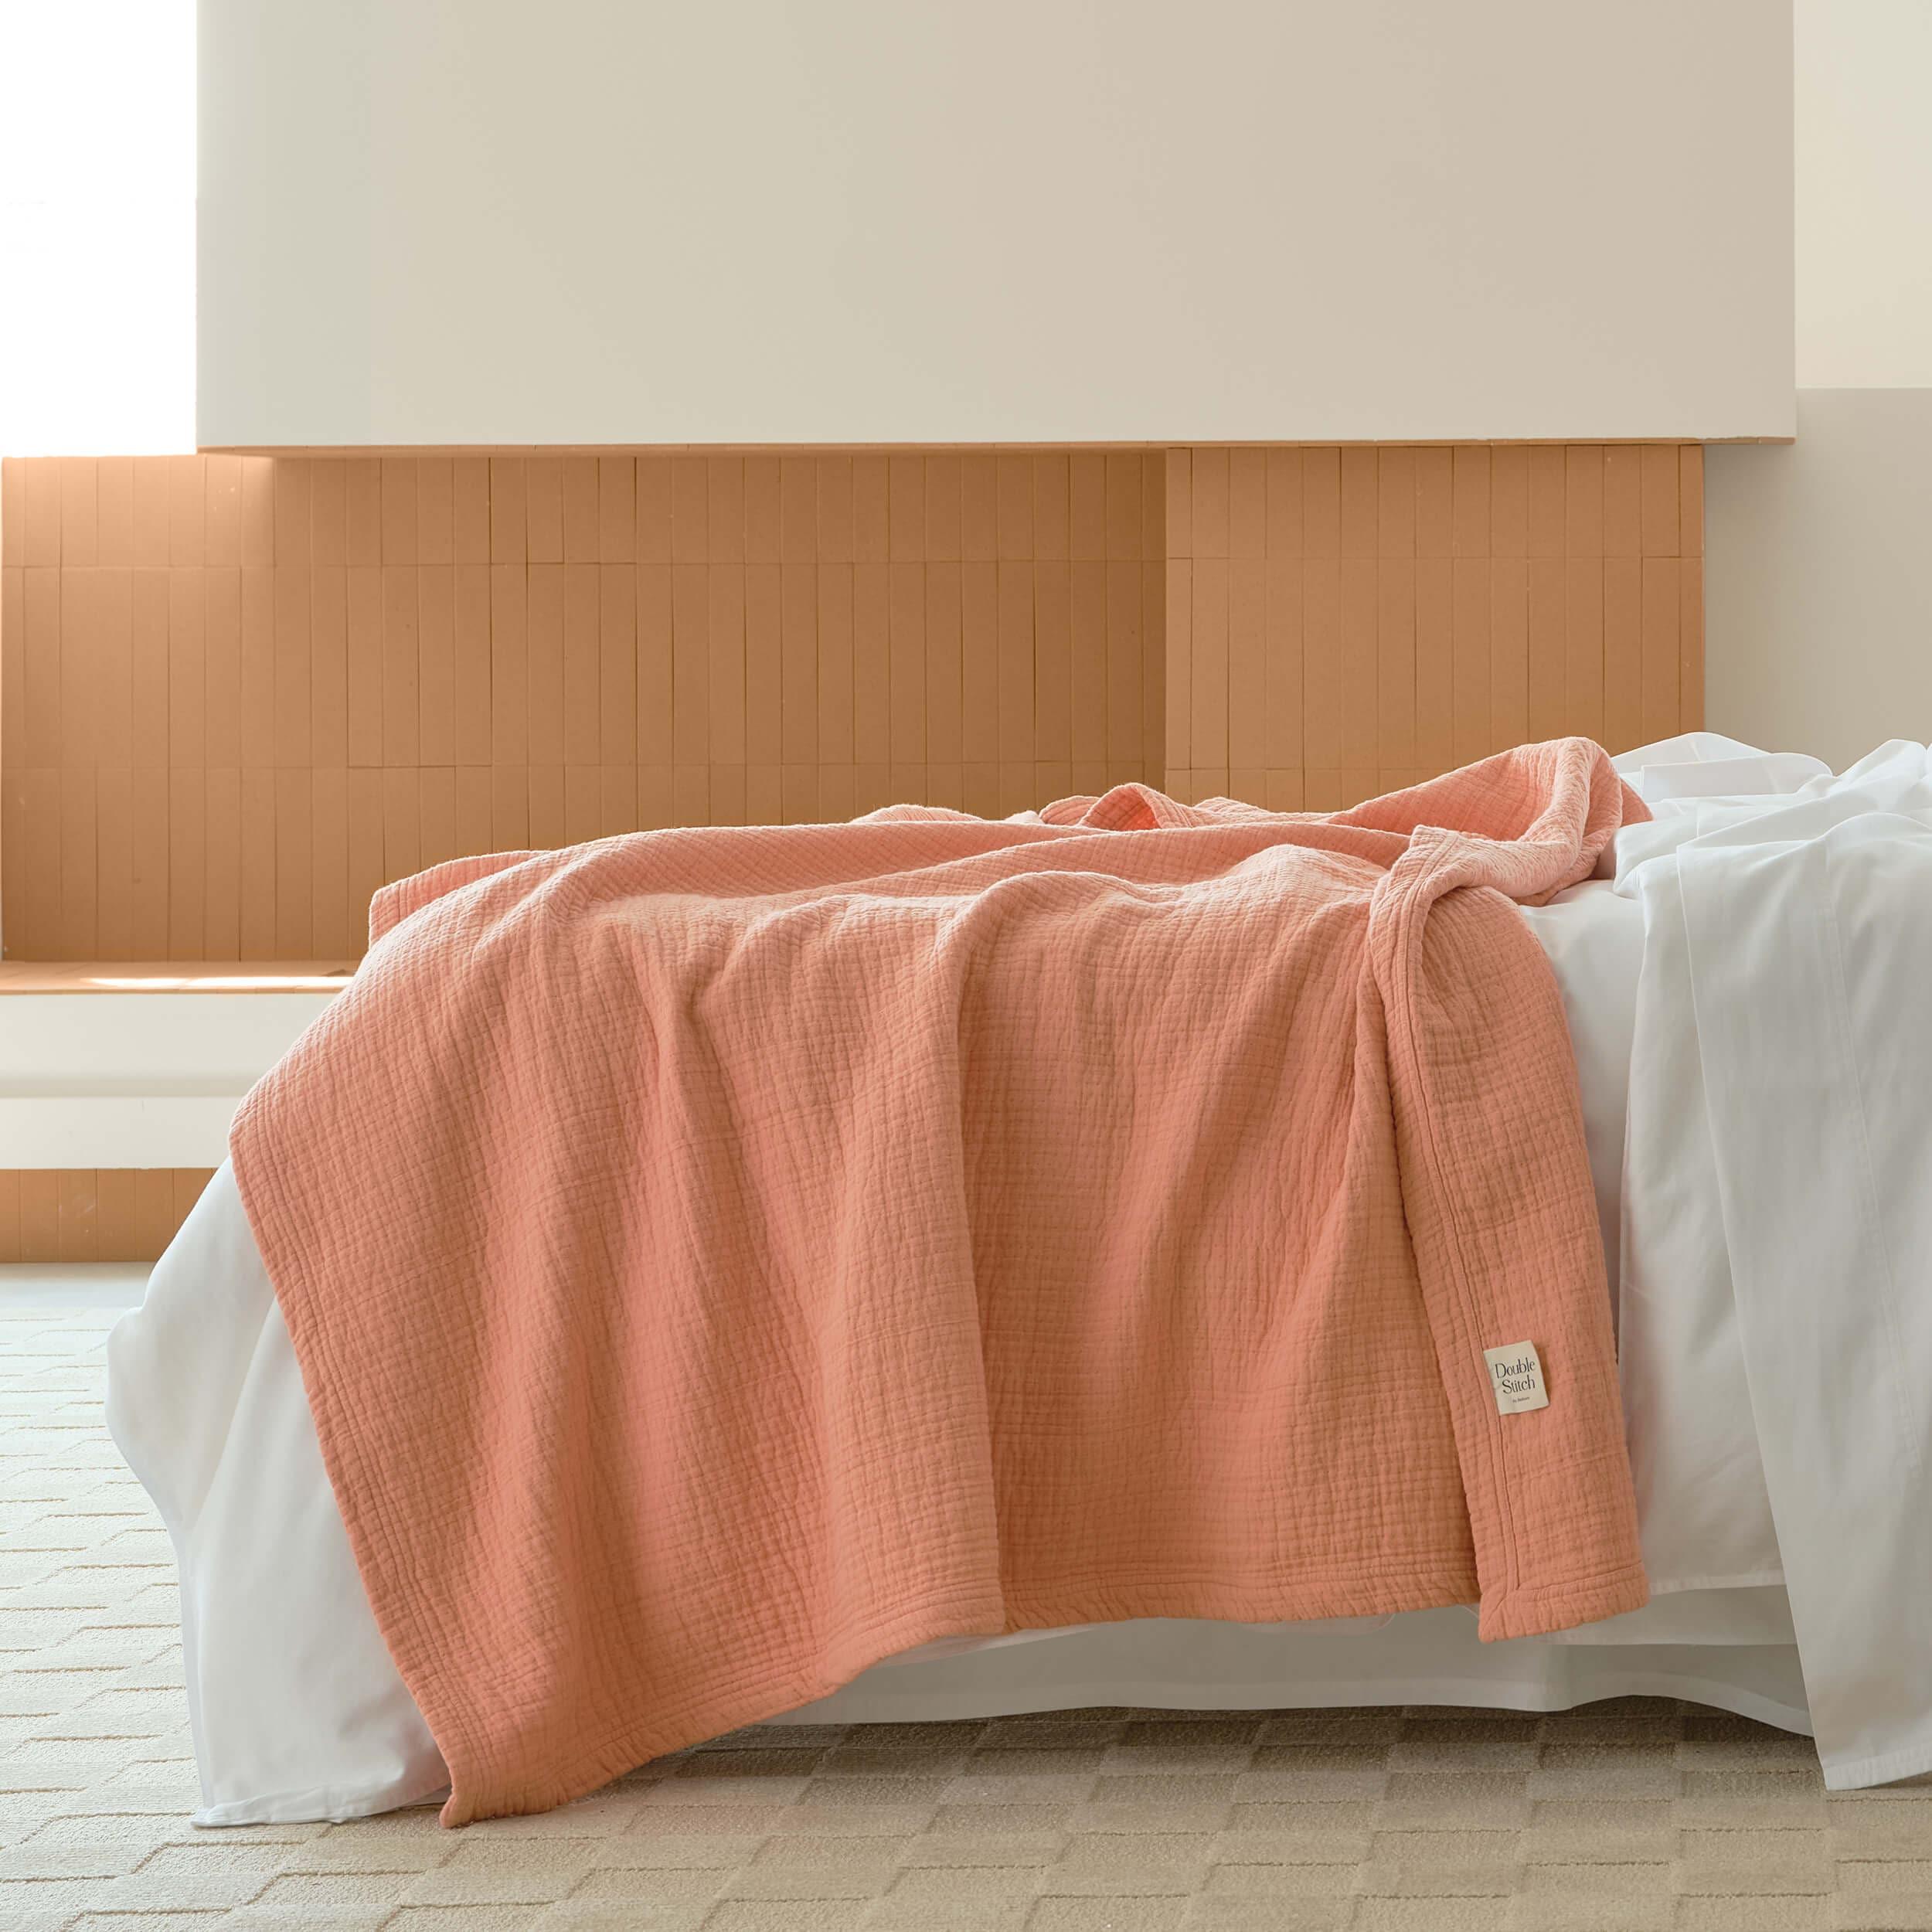 The breathable material of the modern throw blanket makes it ideal for all seasons.